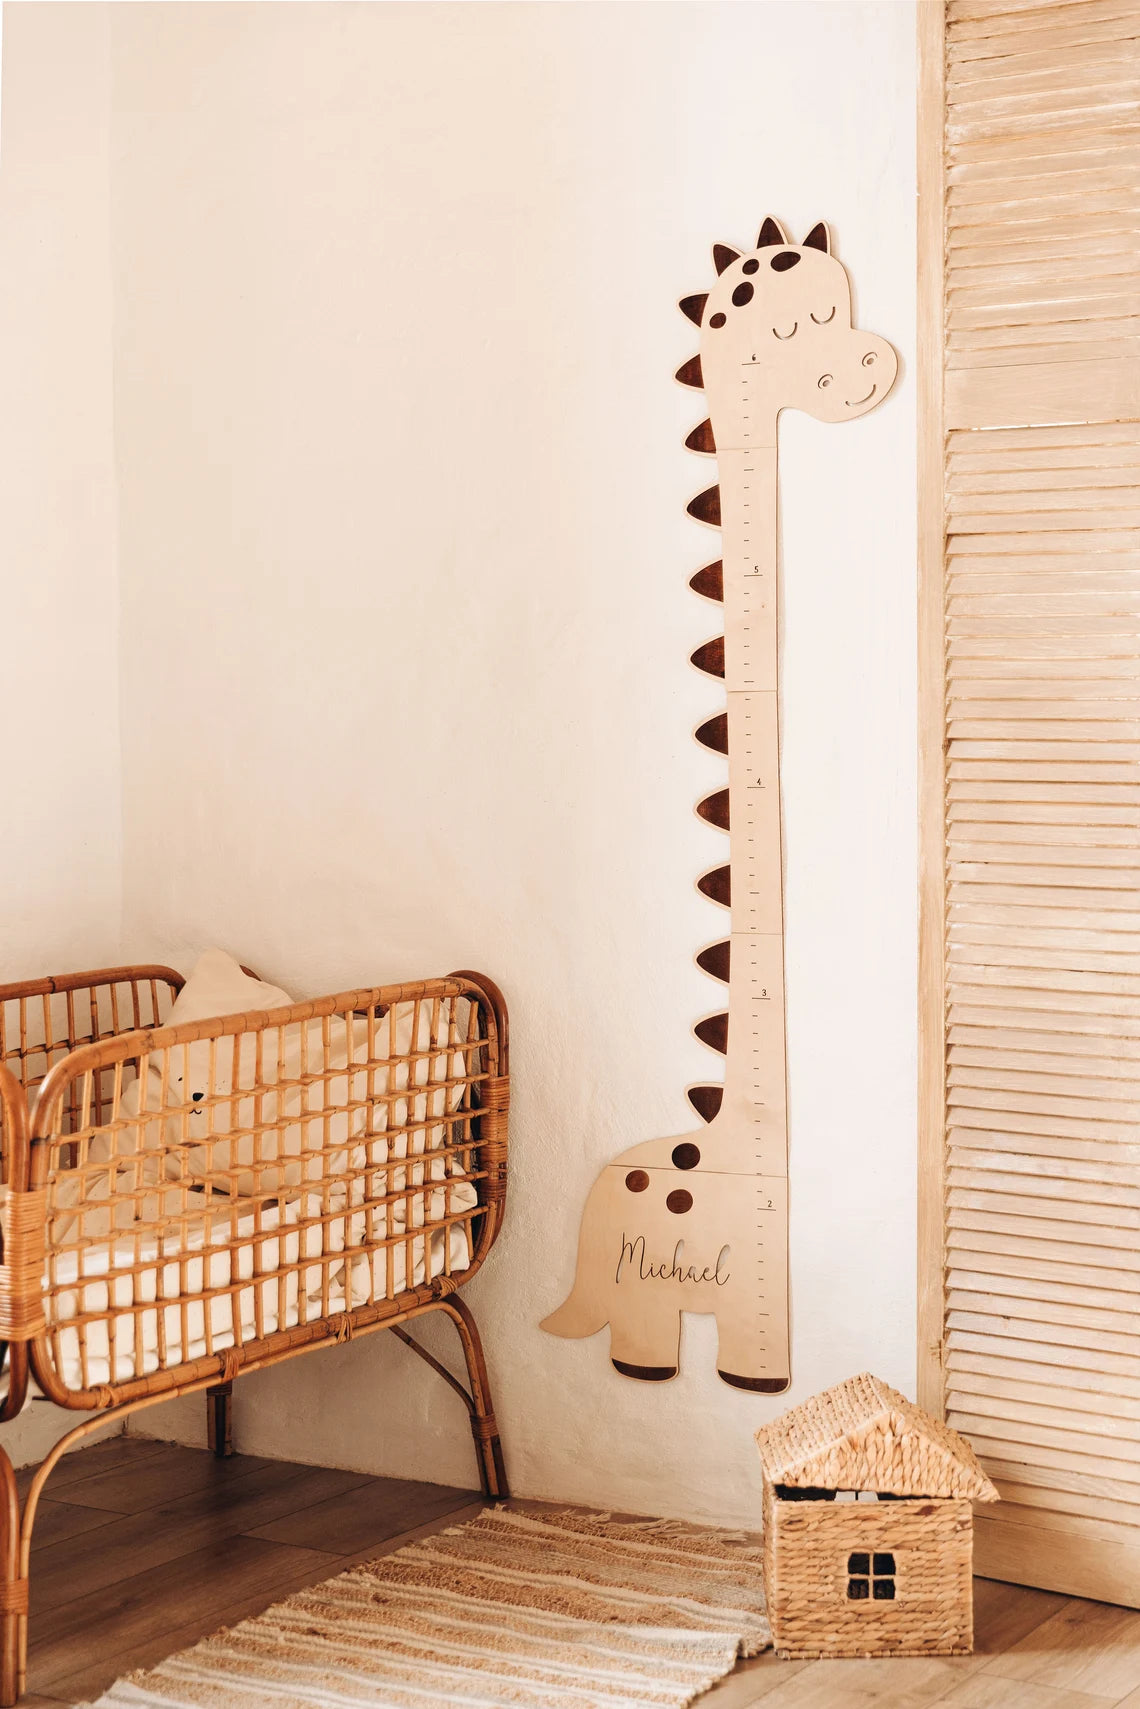 Personalized Wooden Baby Growth Chart